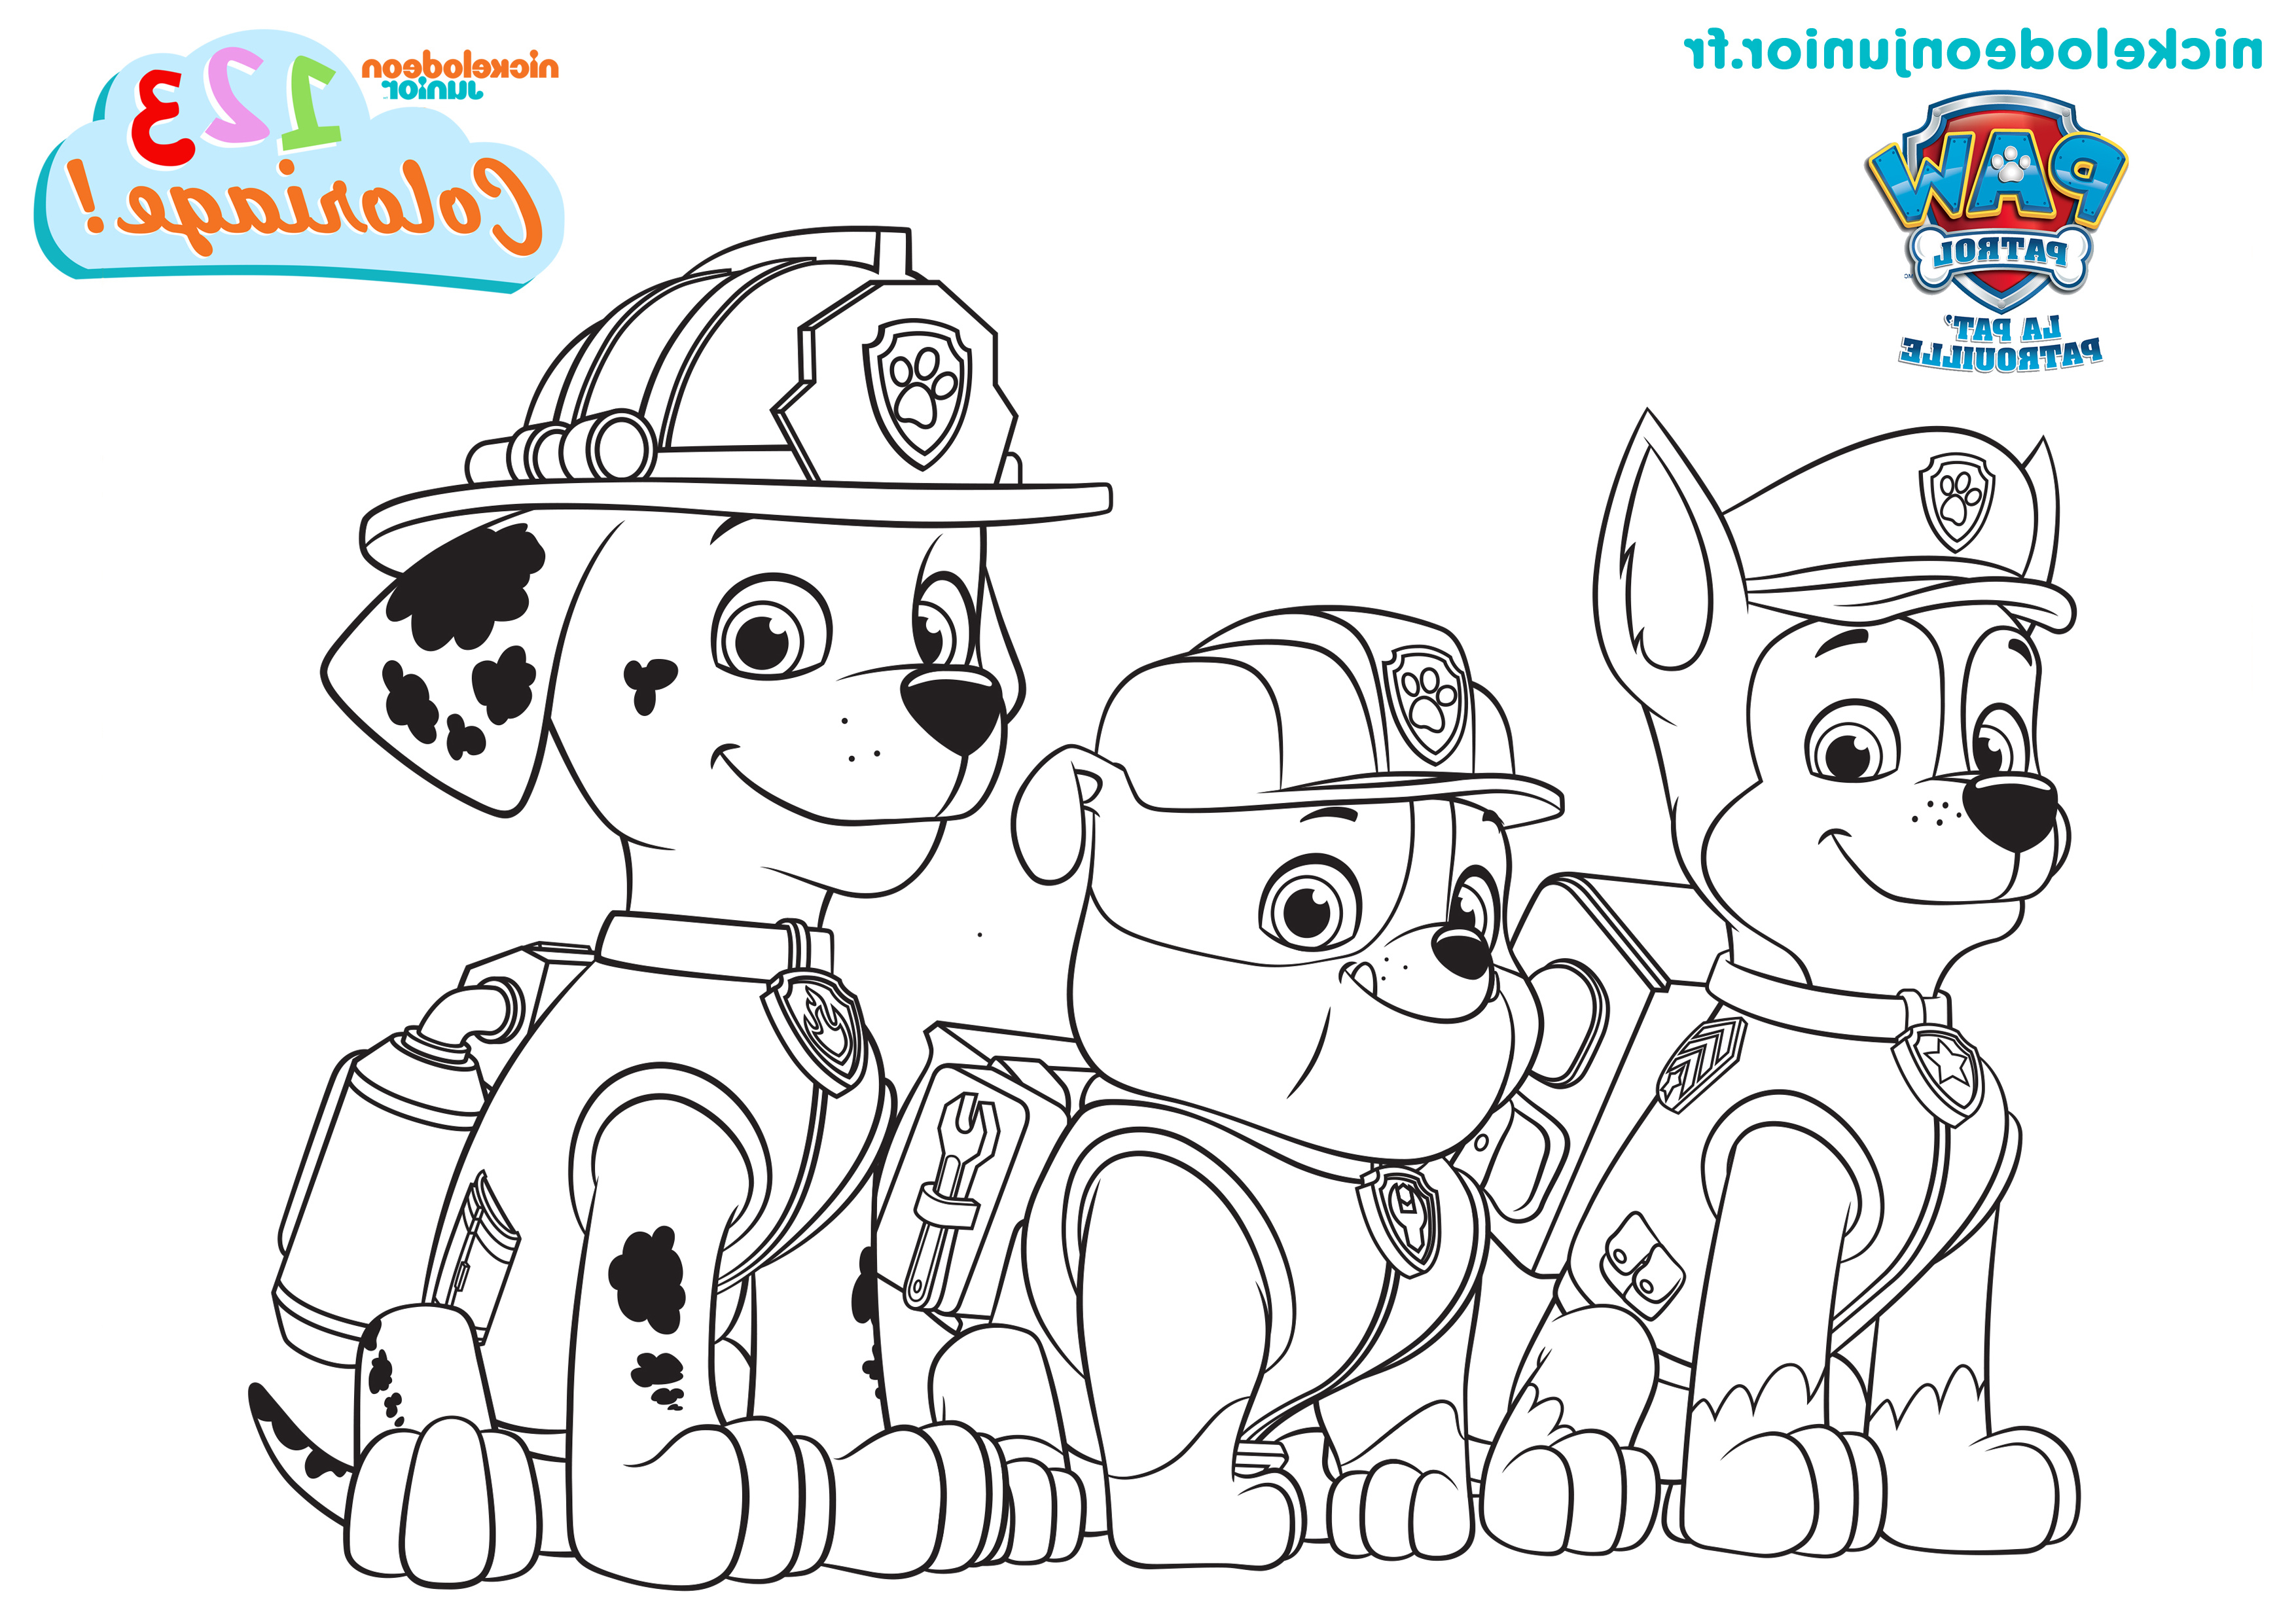 coloriages paw patrol4